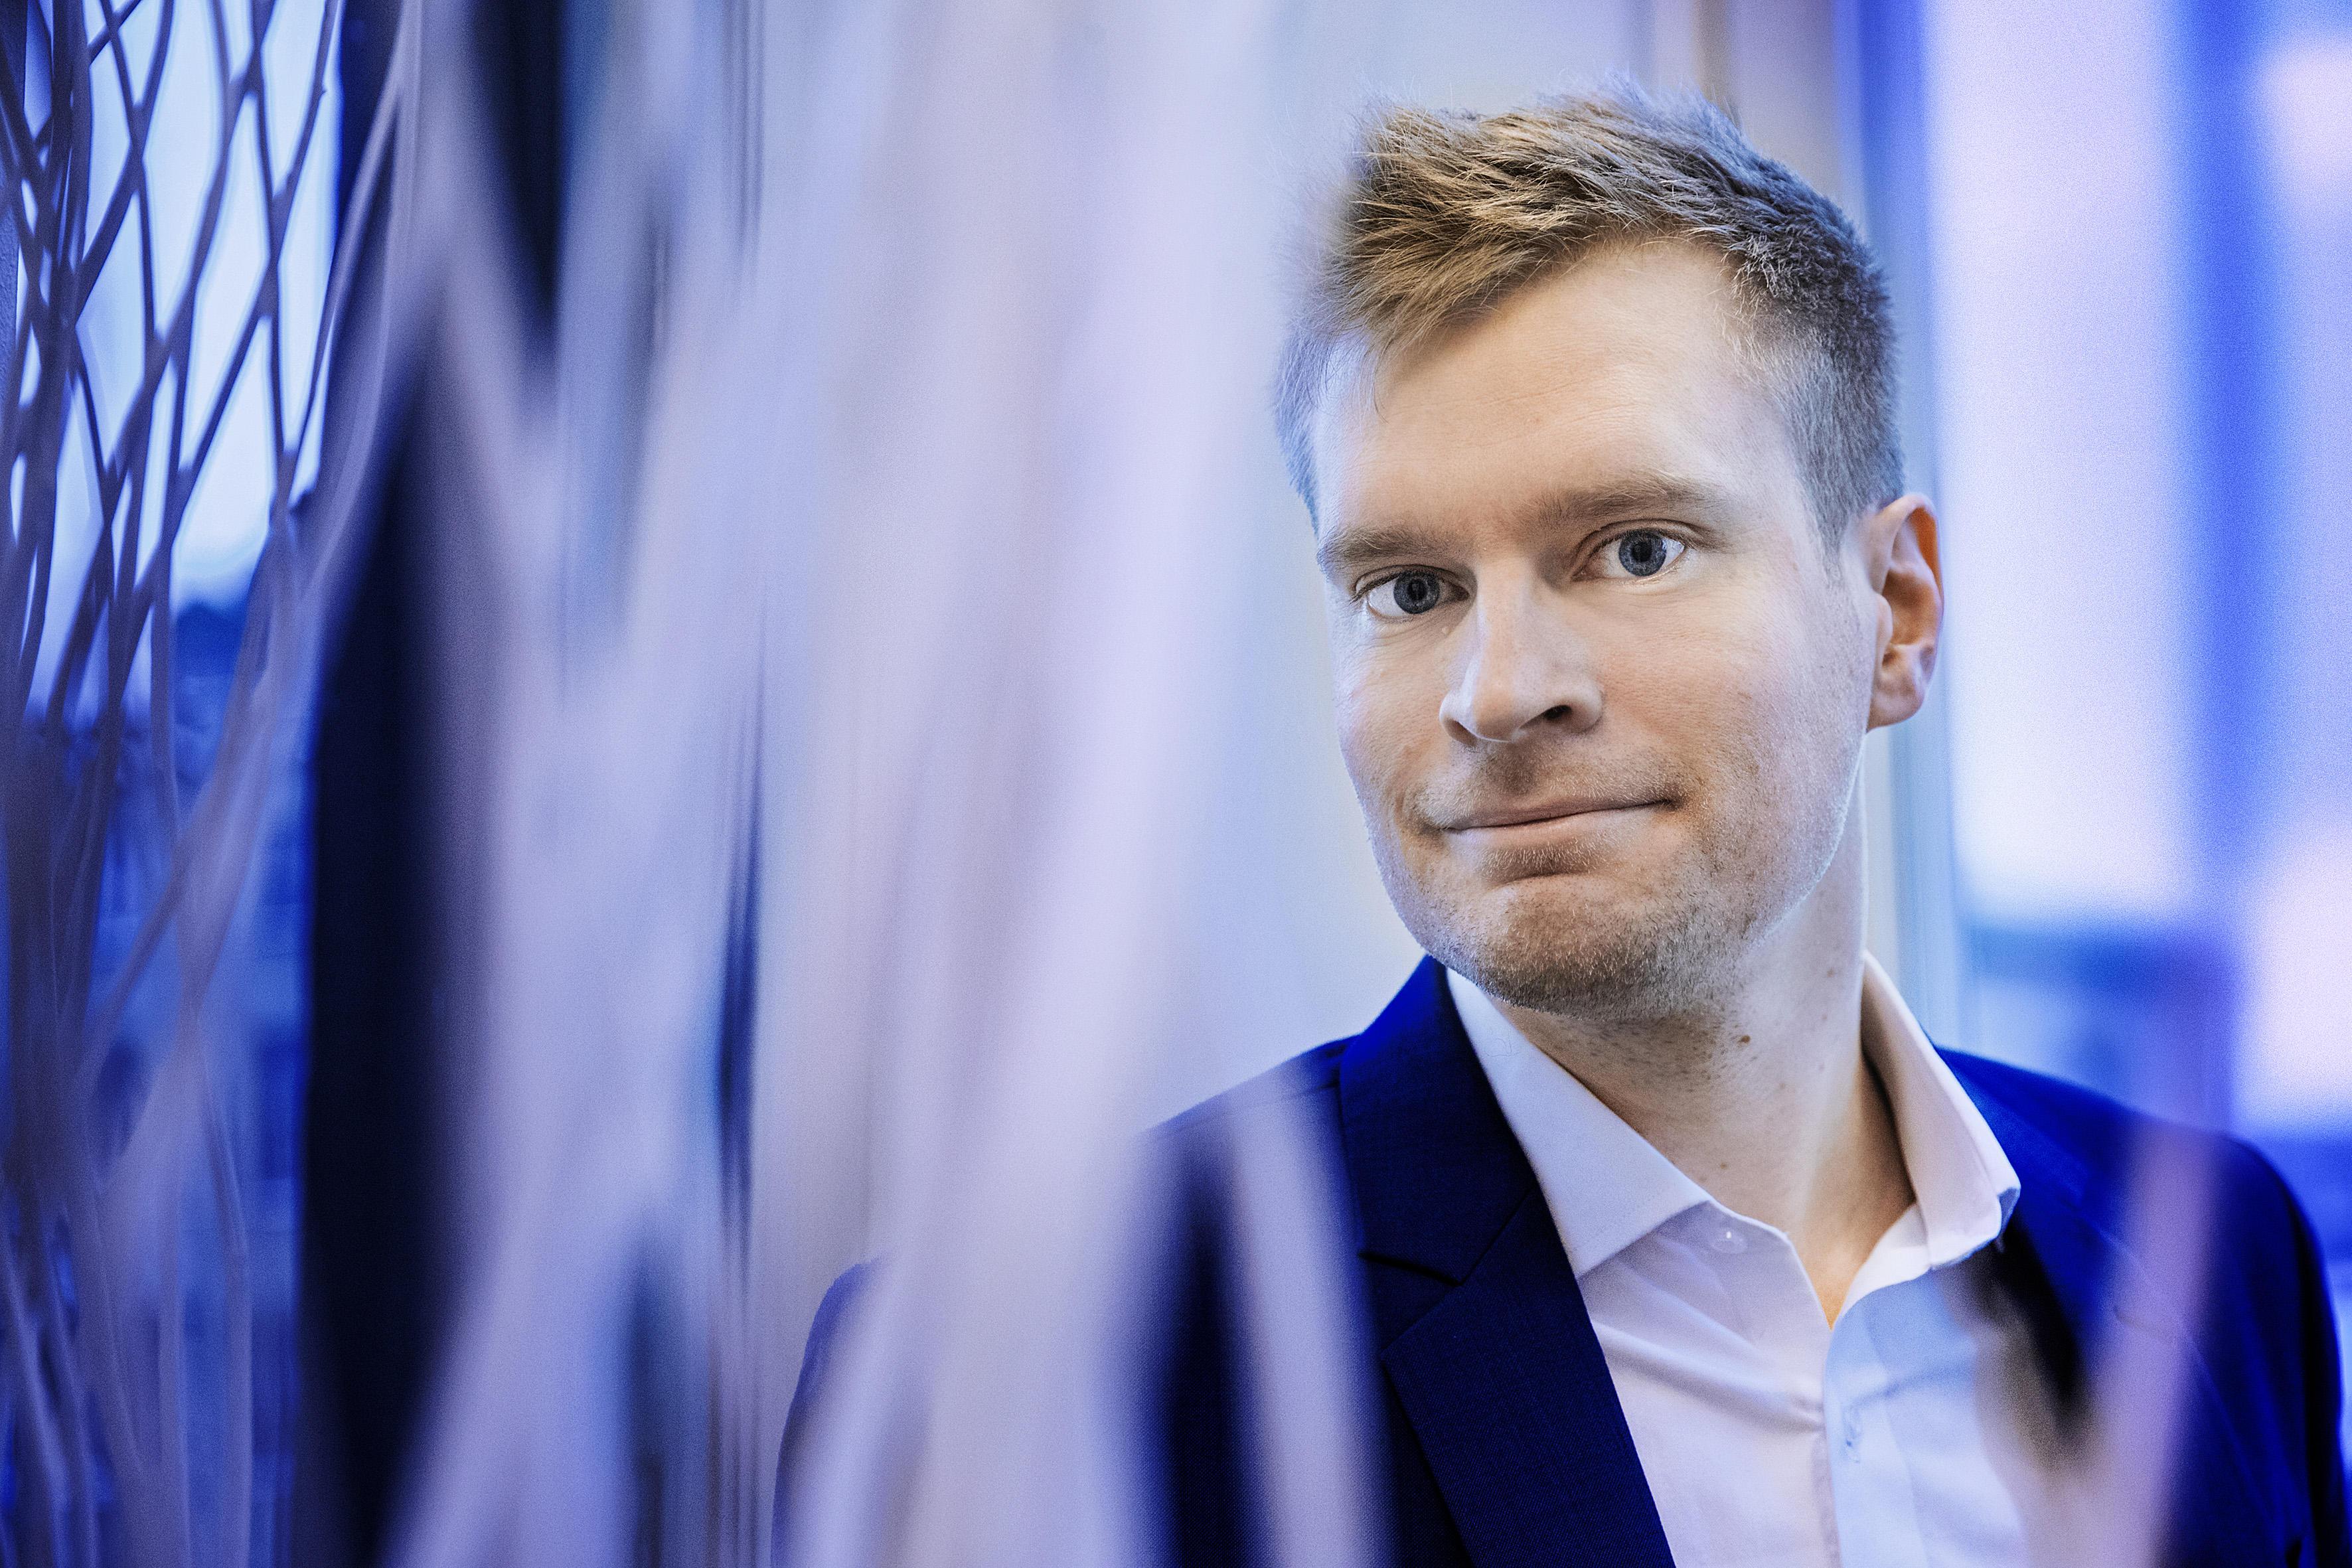 How private investors could make money from integrating immigrants in Finland